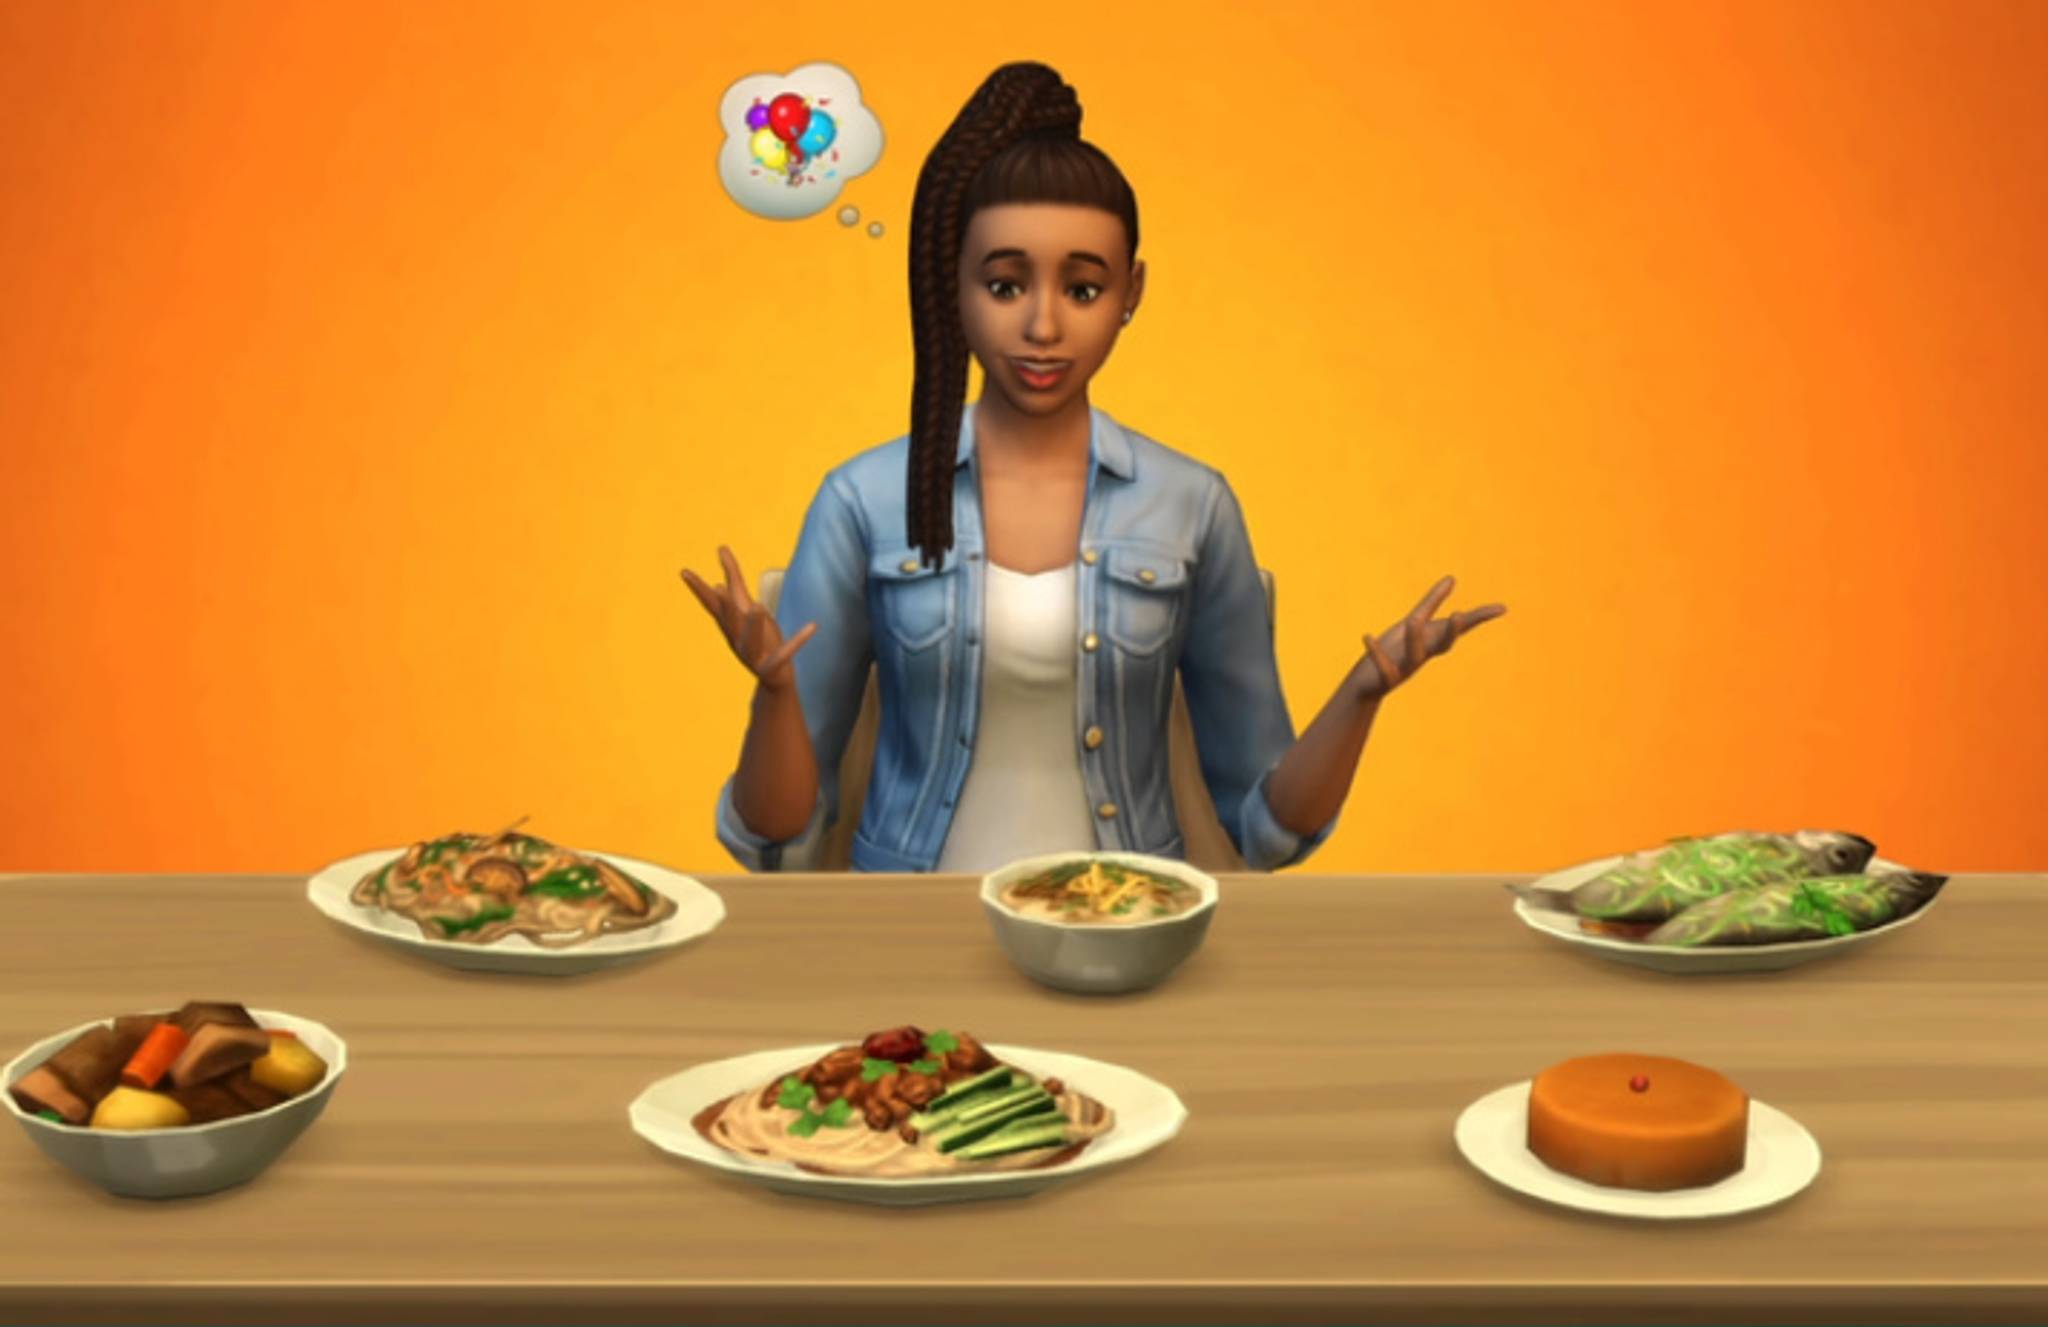 Foodies are tasting diverse dishes in 'The Sims'